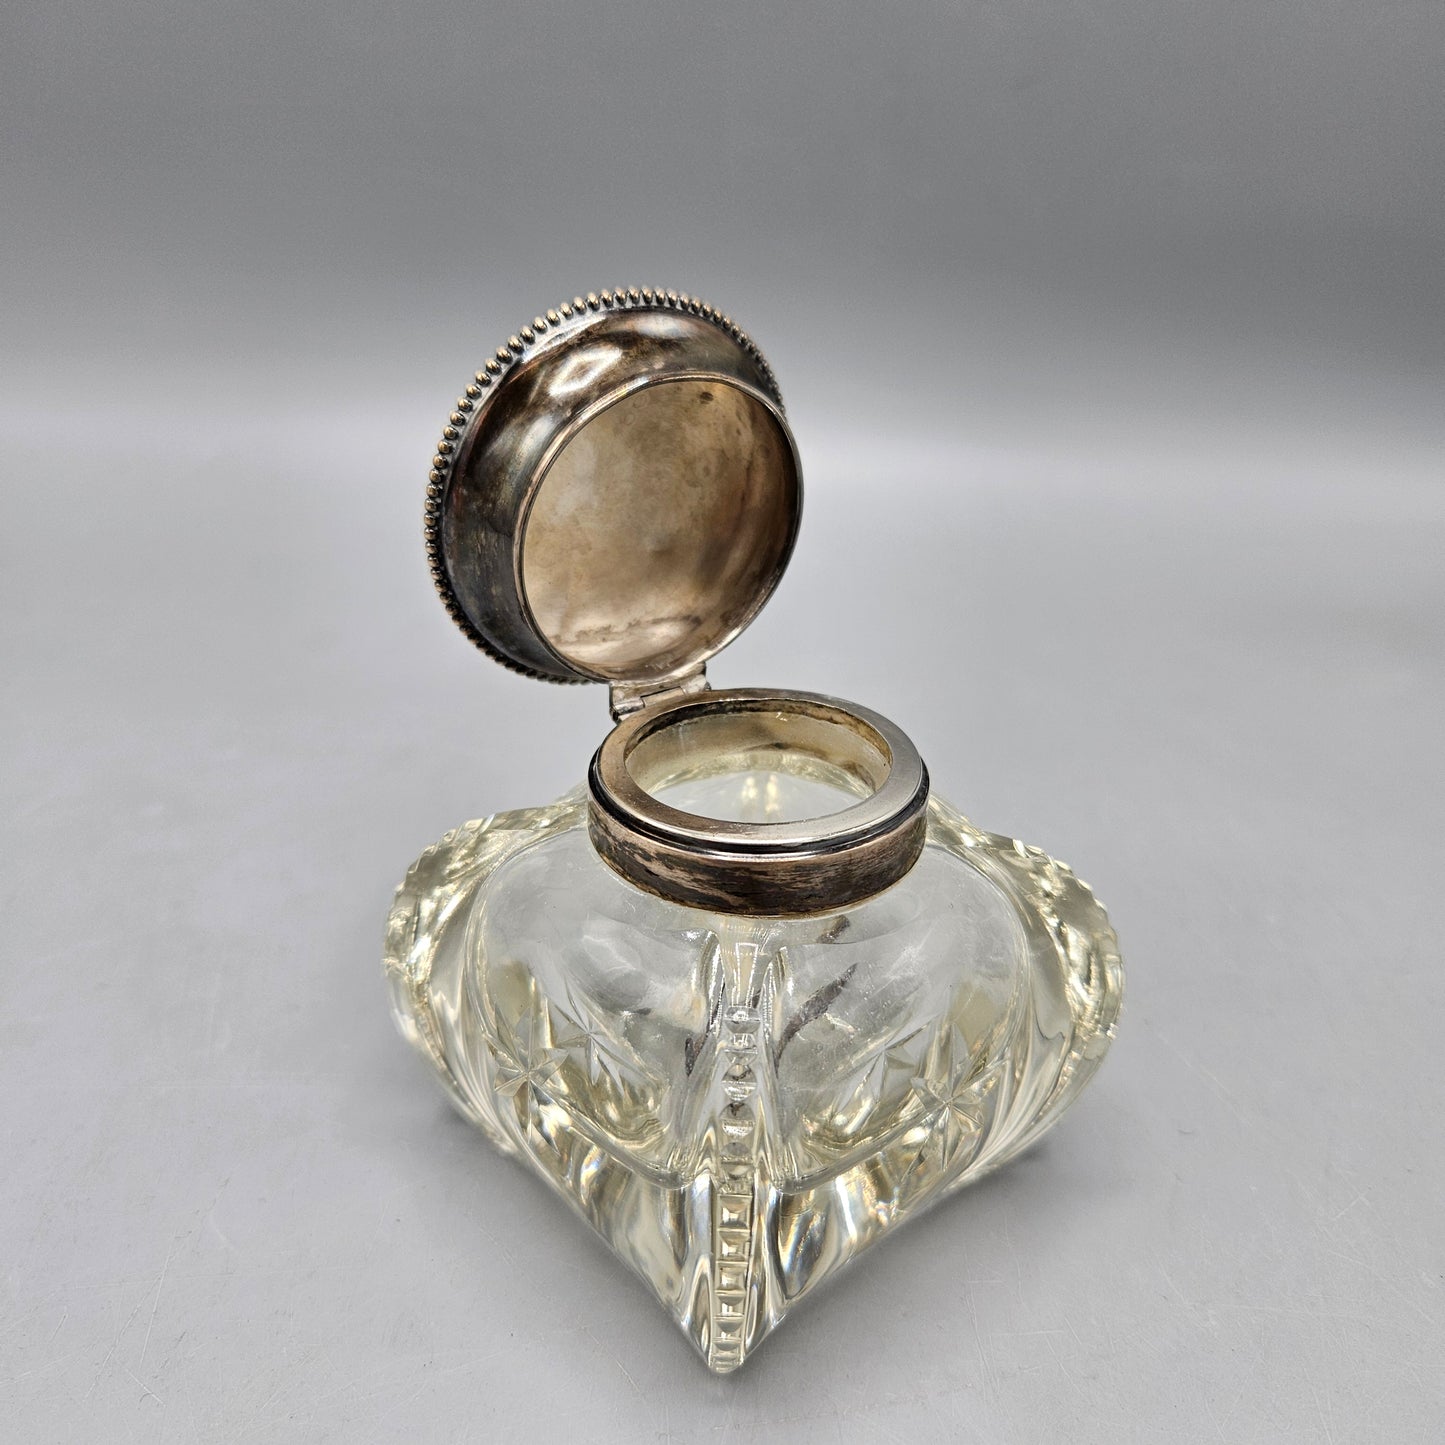 Antique Crystal Square Base Inkwell with Sterling Silver Lid Monogrammed